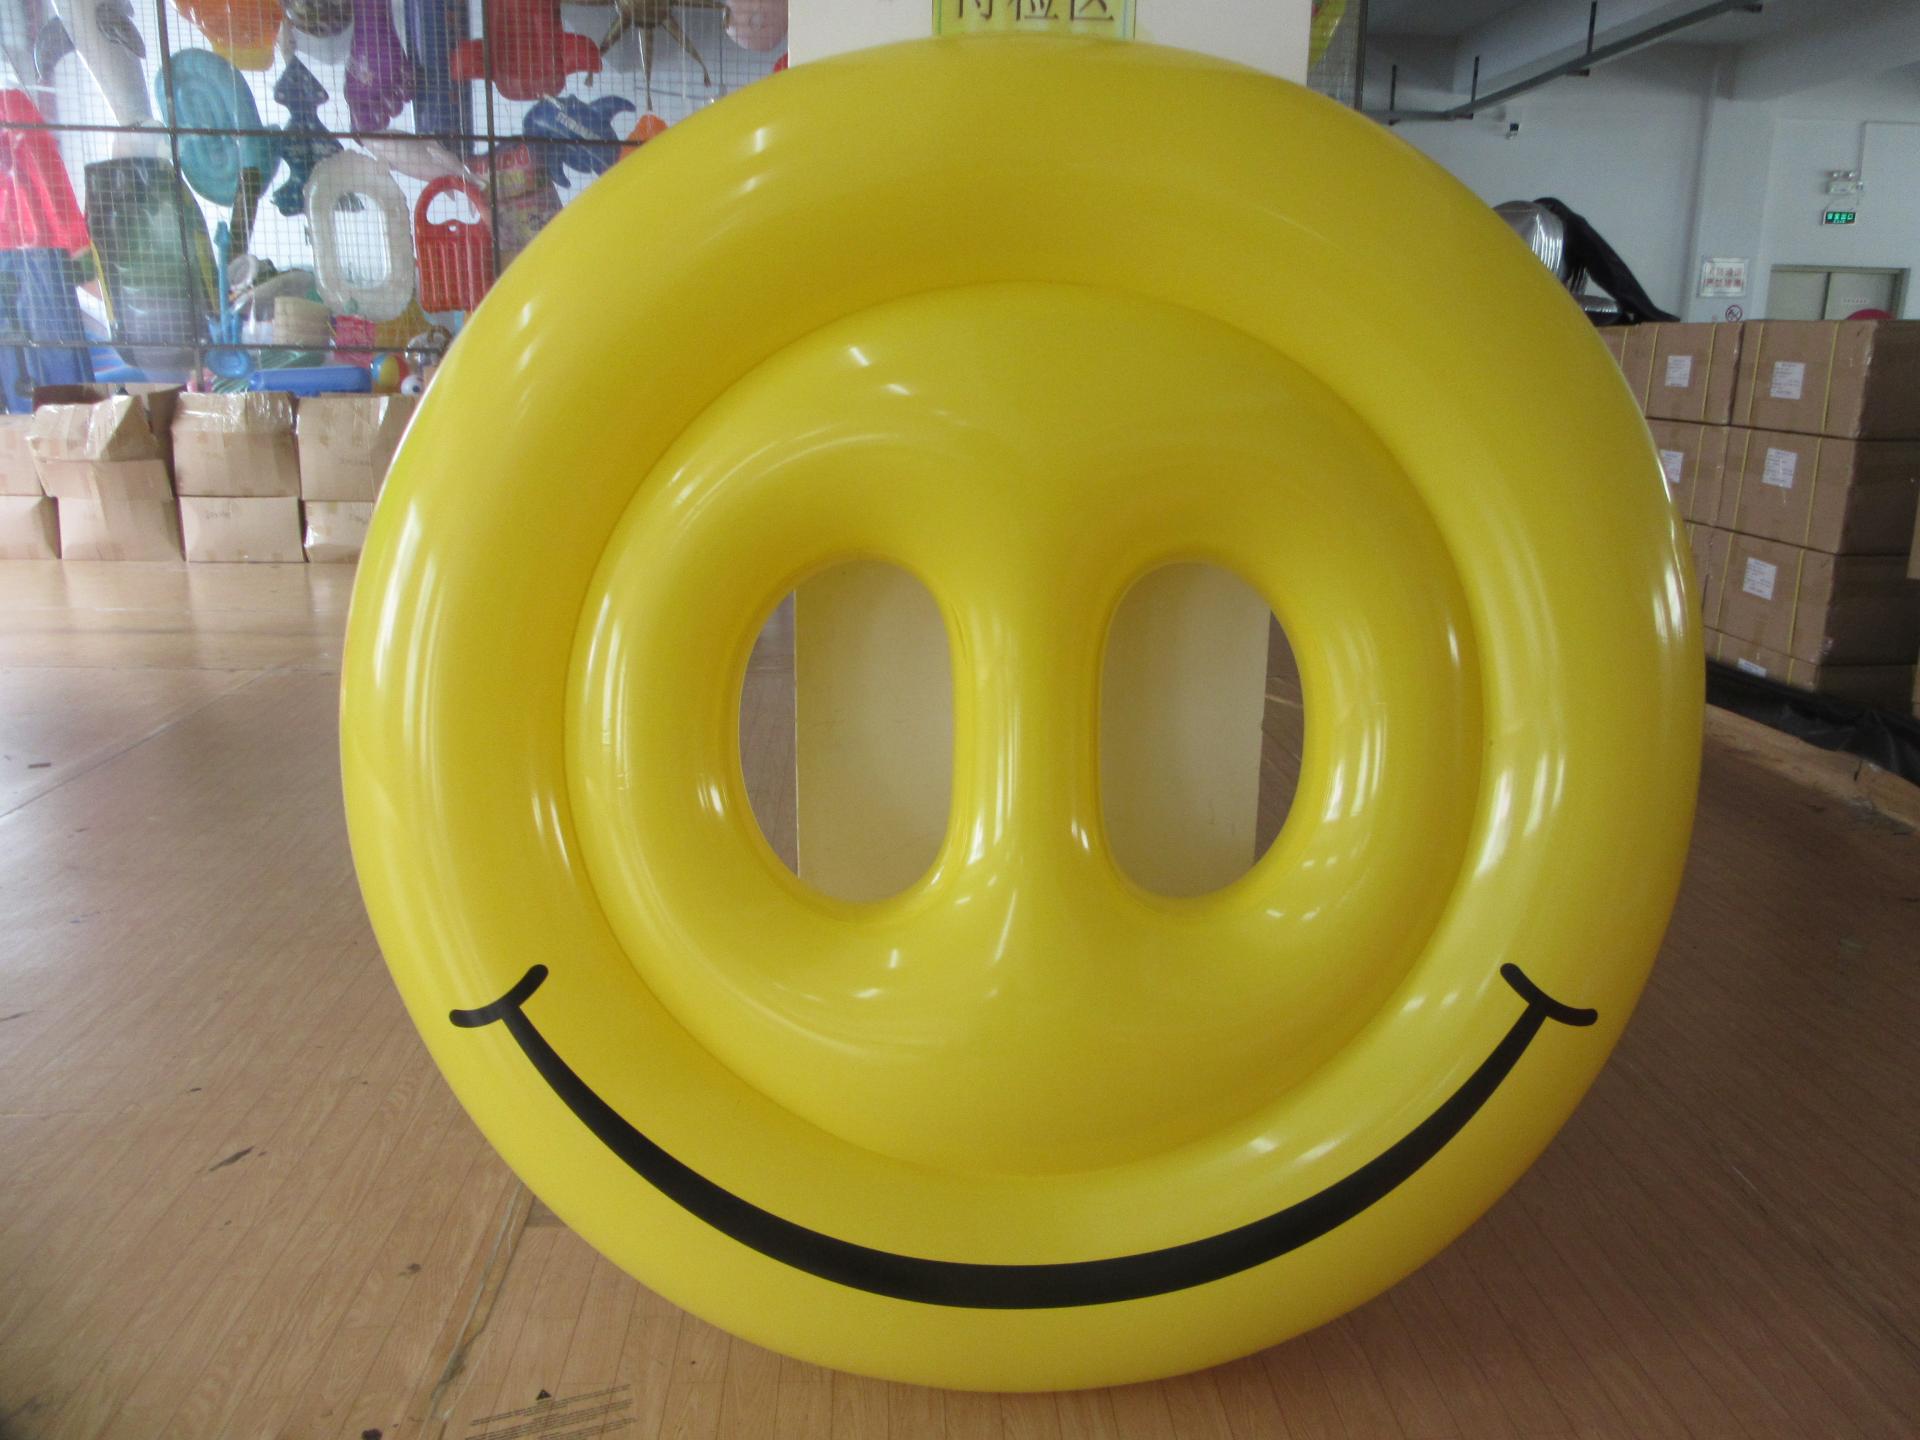 Inflatable Yellow PVC Smileface Float Mattress